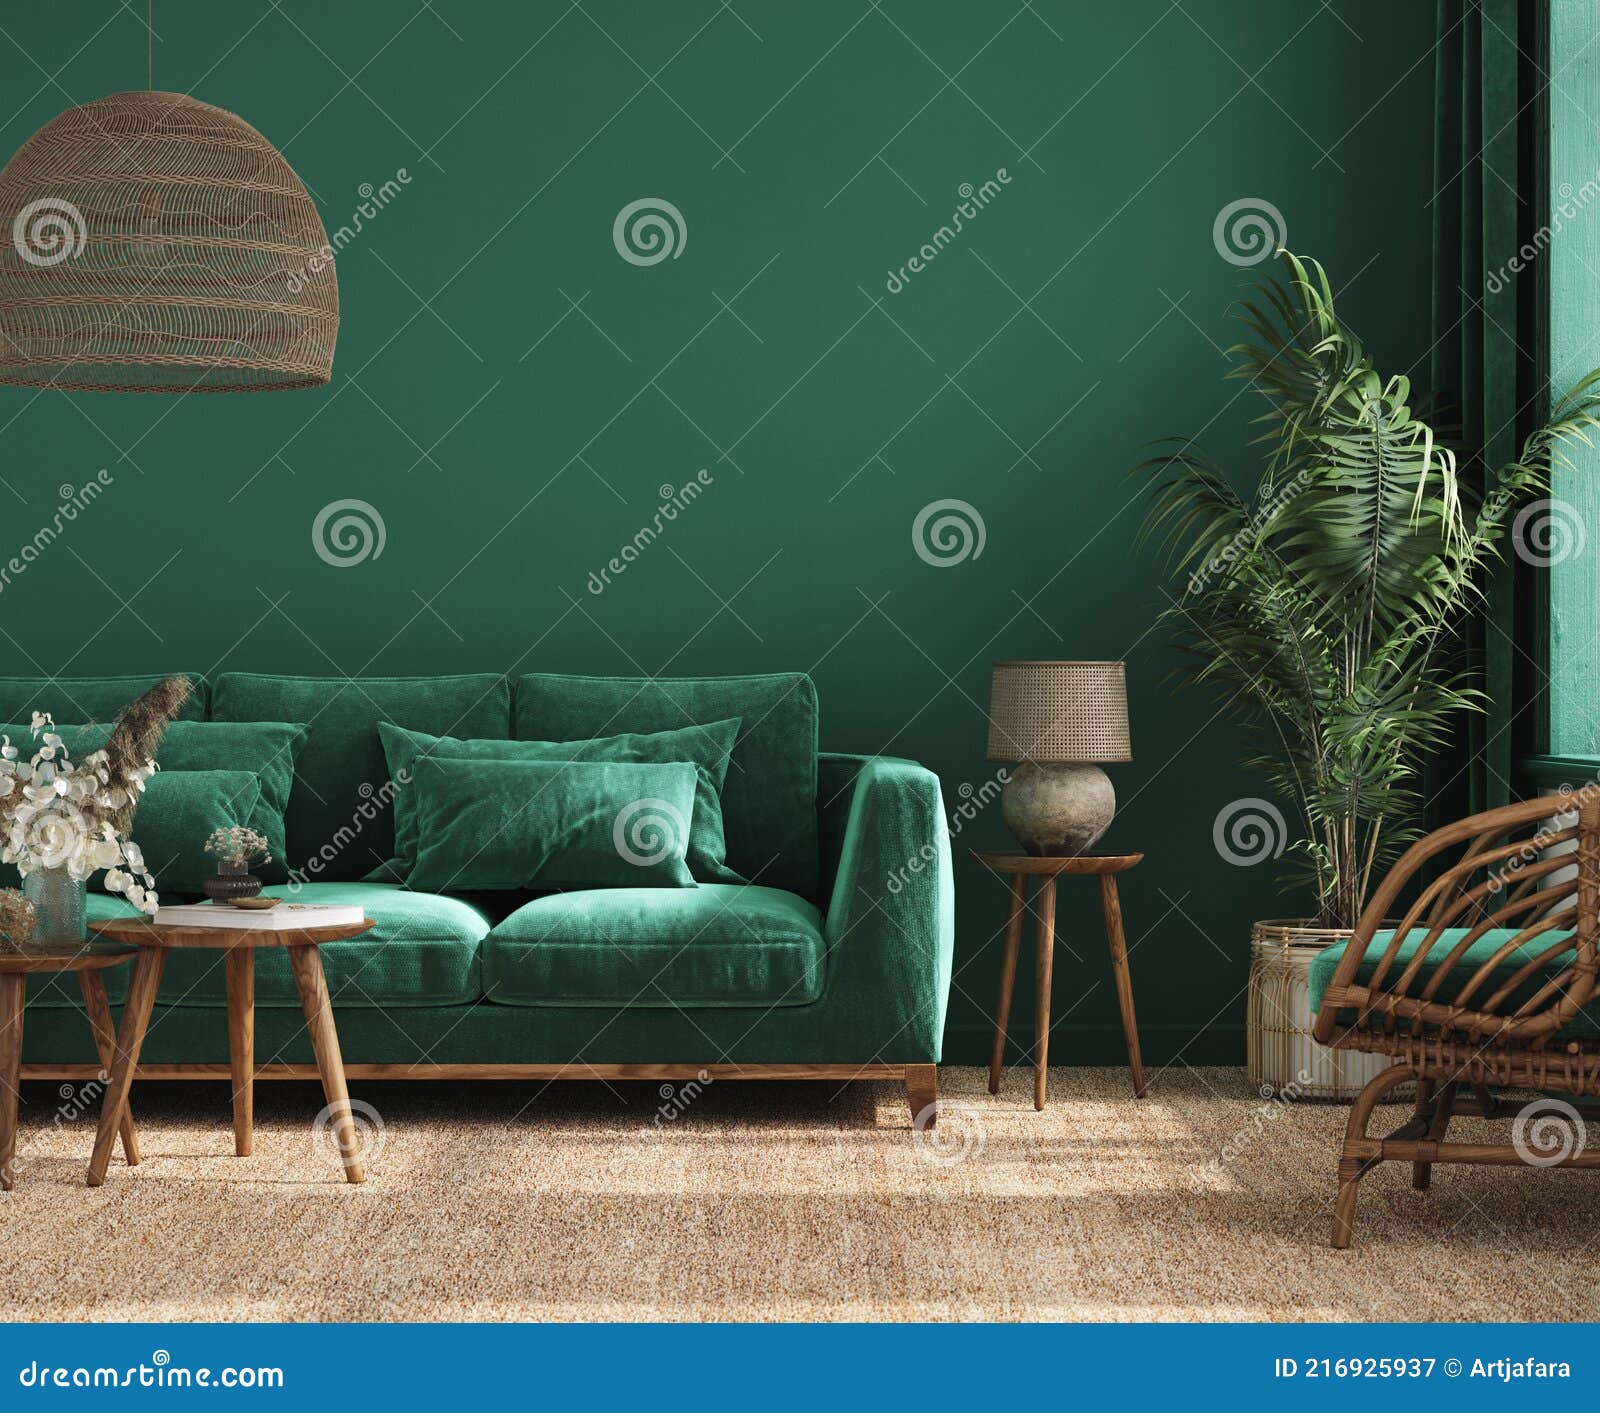 Home Interior Background with Green Sofa, Table and Decor in ...